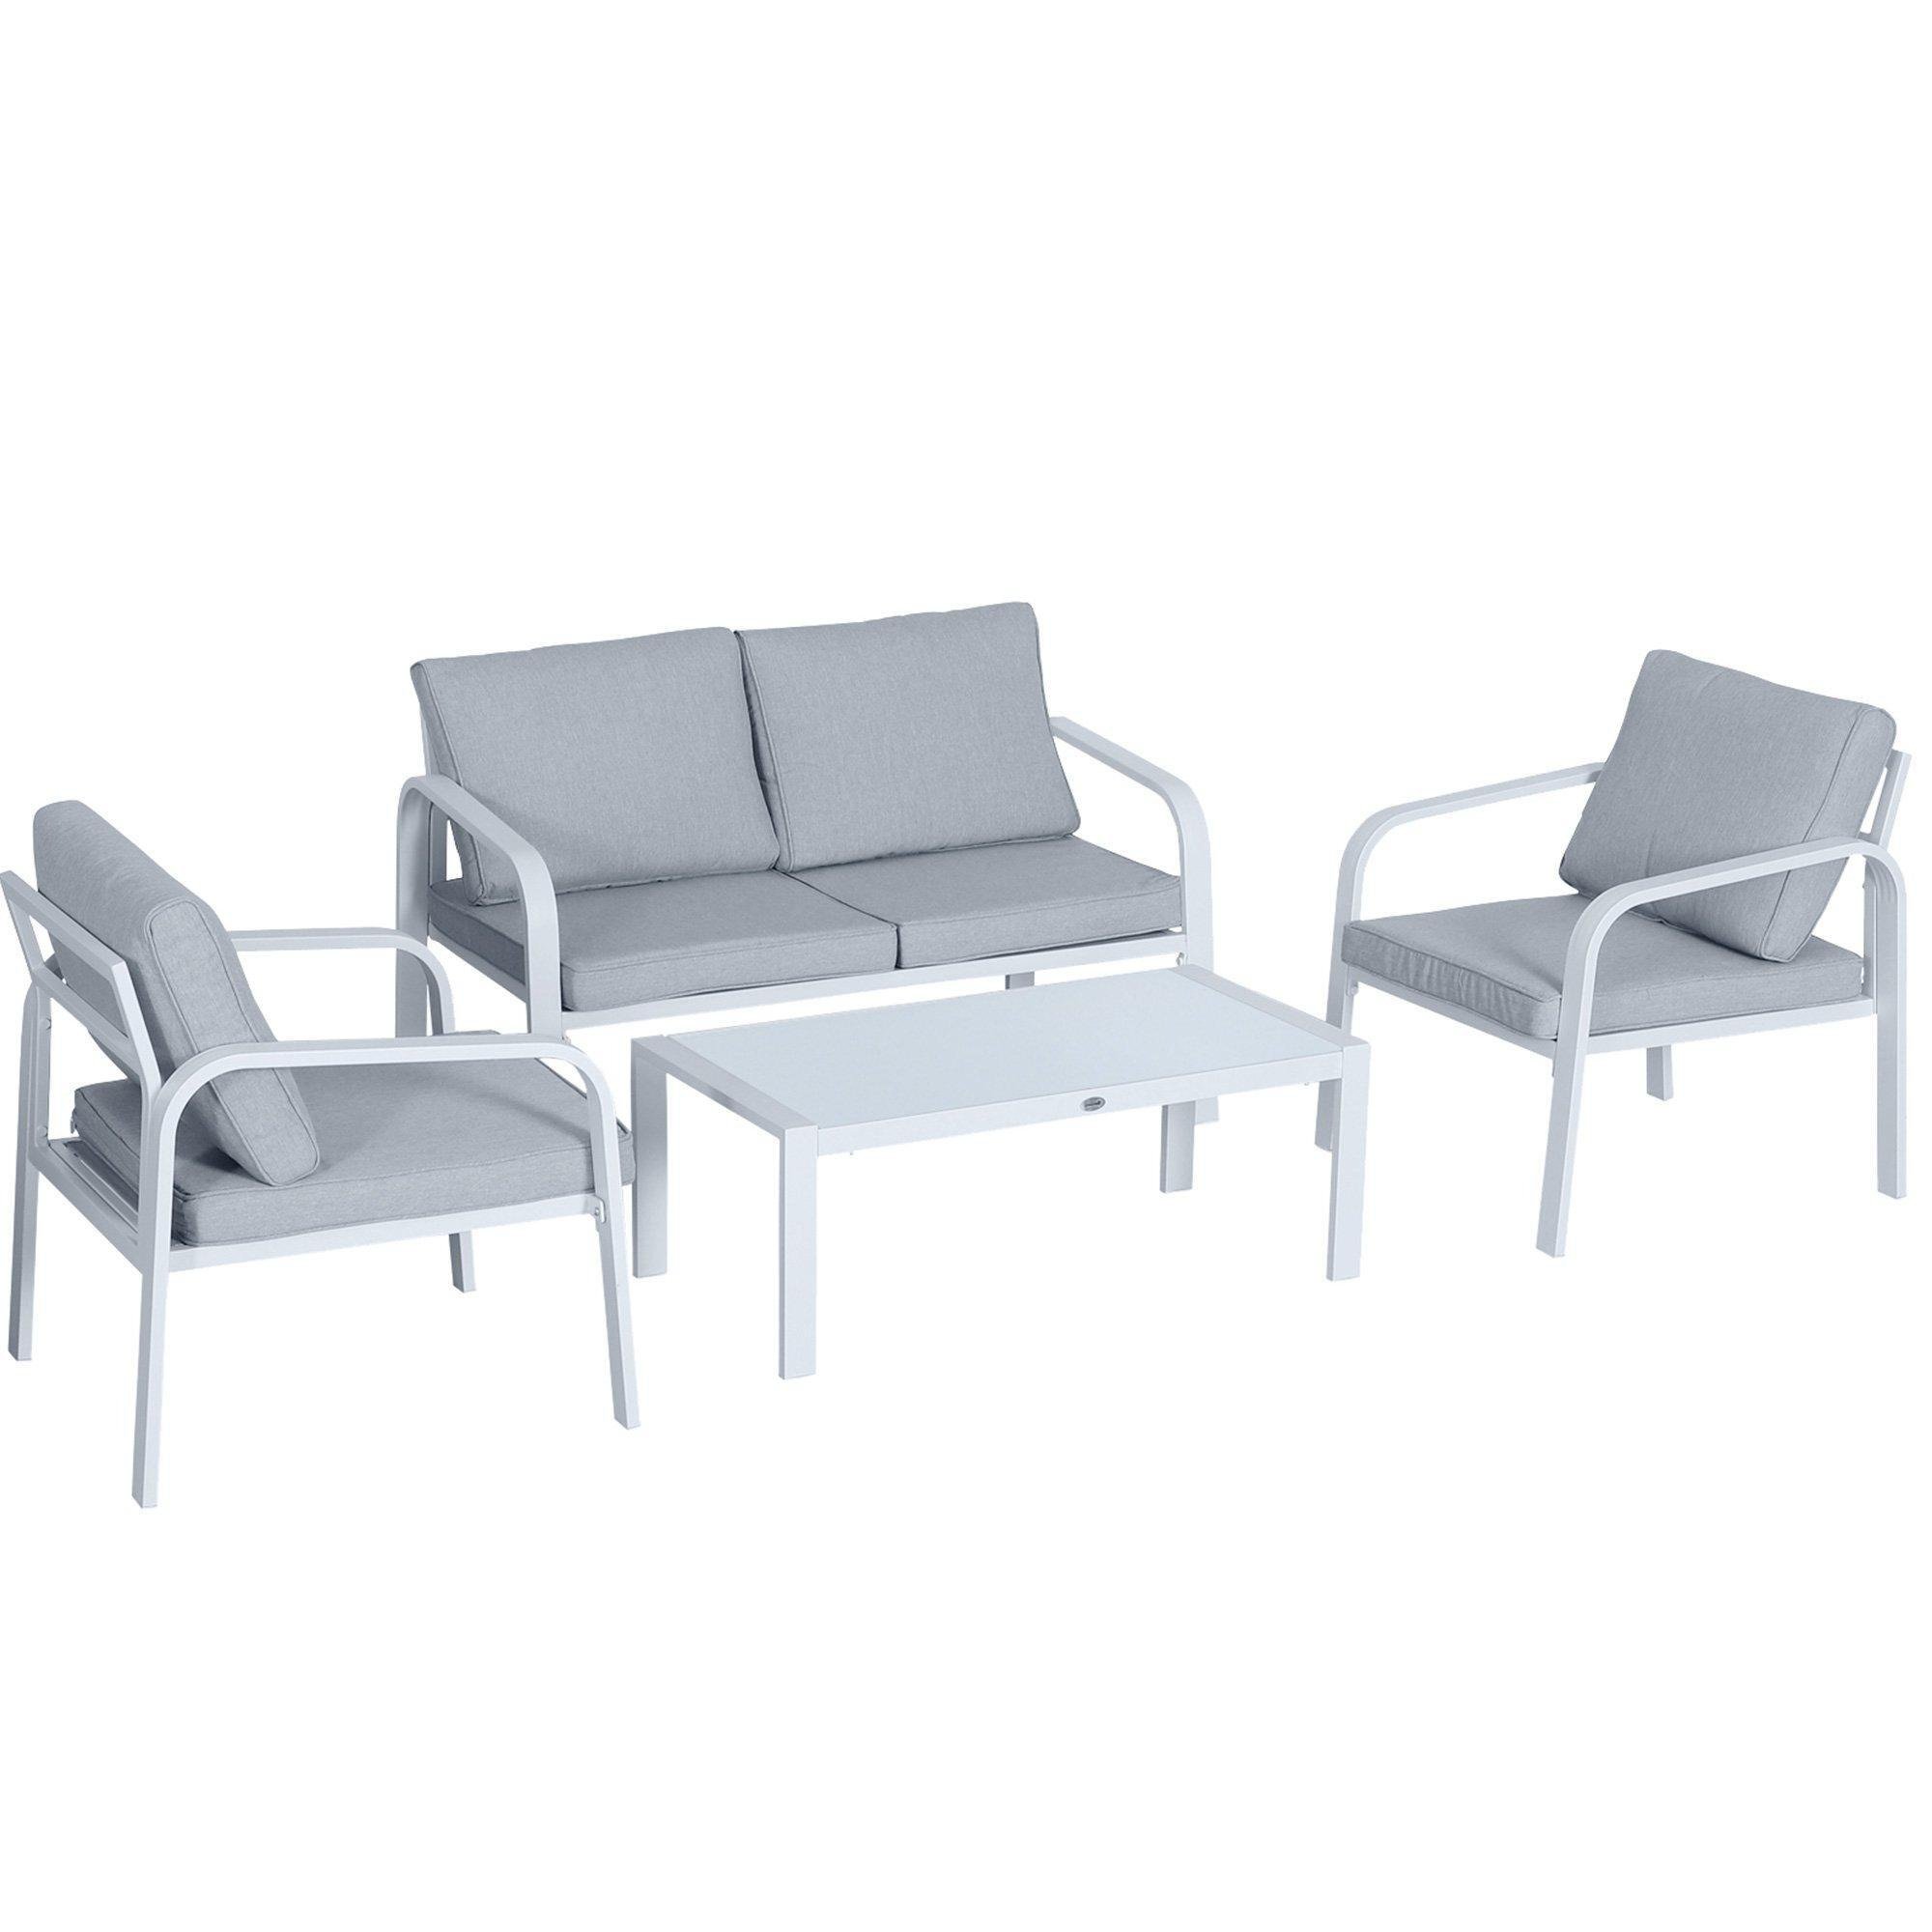 4pcs Garden Loveseat Chairs Table Furniture Aluminum with Cushion - image 1